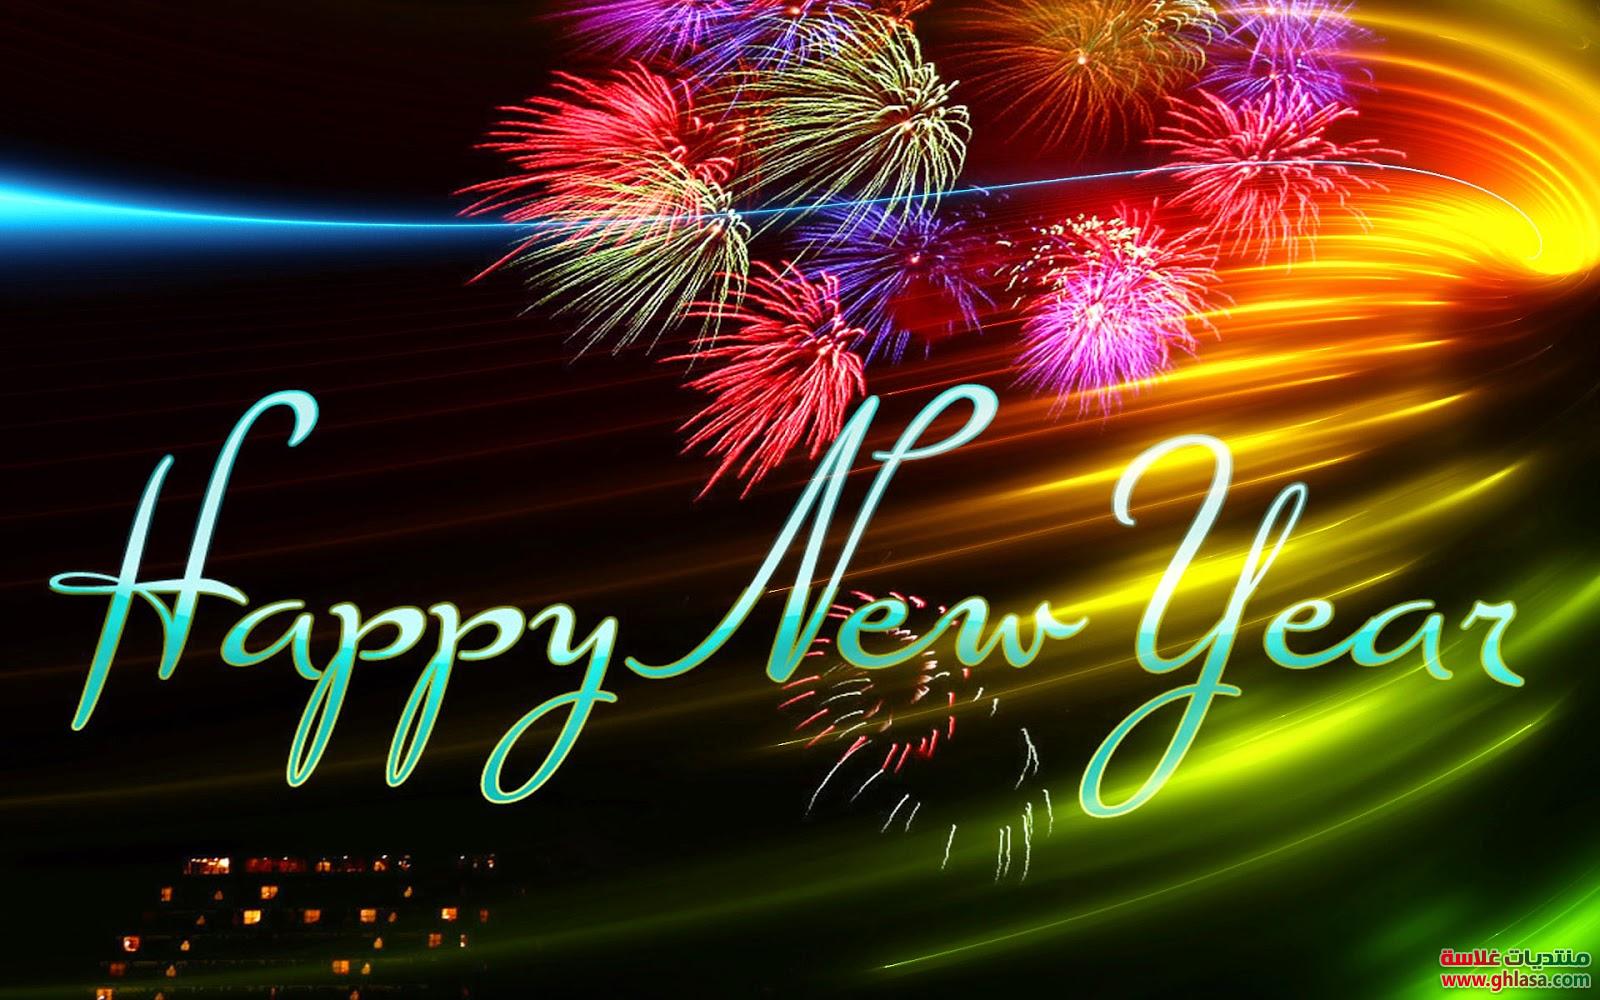   2024 / 2025 ,     2024 / 2025 , happy new year2024 / 2025 do.php?img=66835